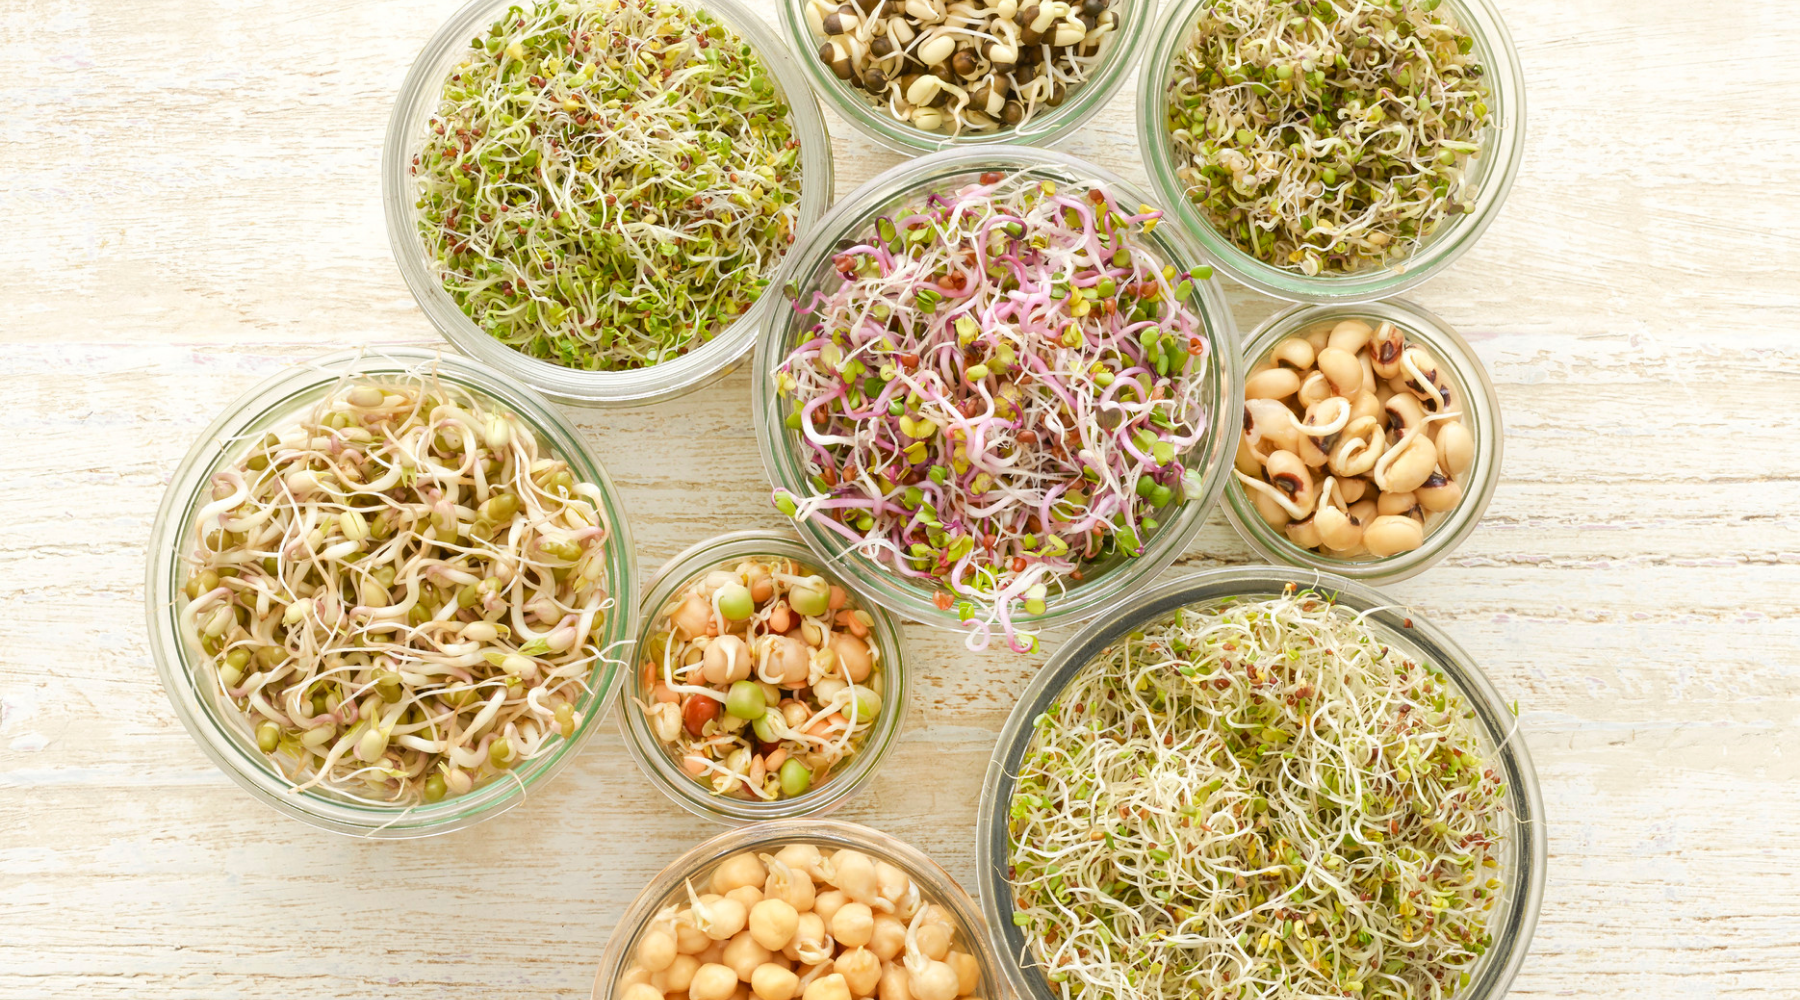 WHAT ARE THE BEST SEEDS FOR SPROUTING?